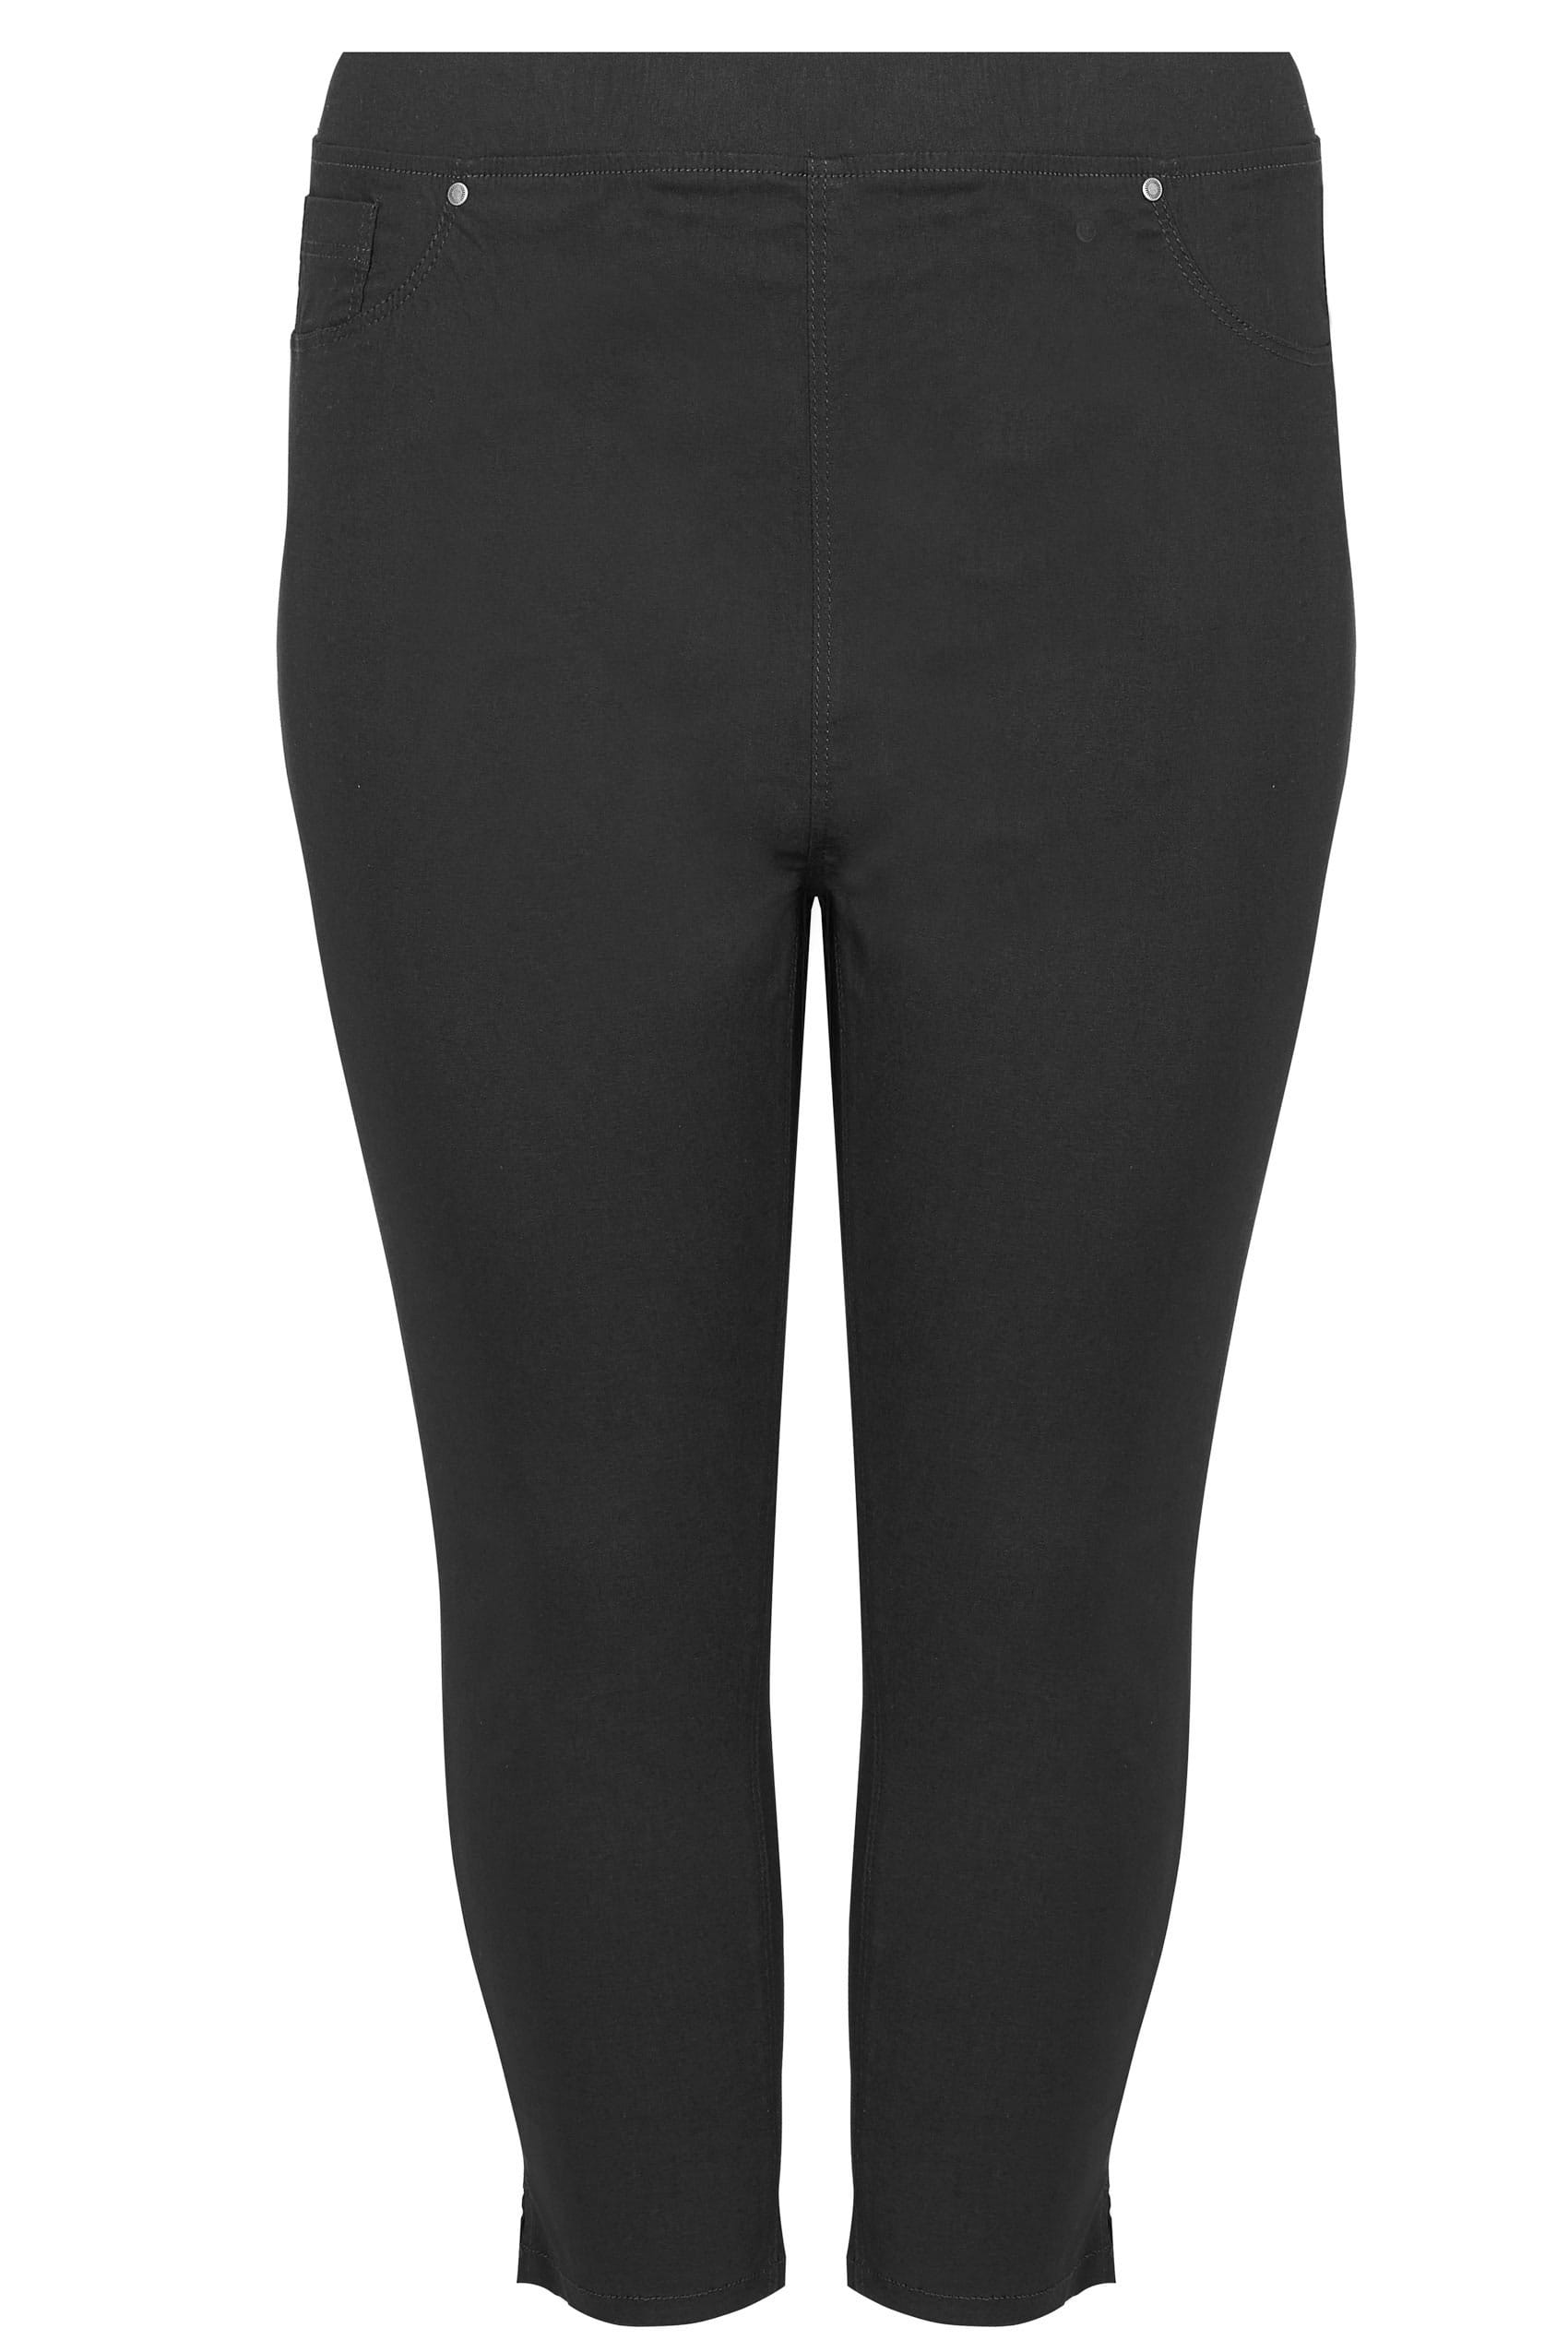 Black Bengaline Cropped Pull On Trousers, plus size 16 to 36 3